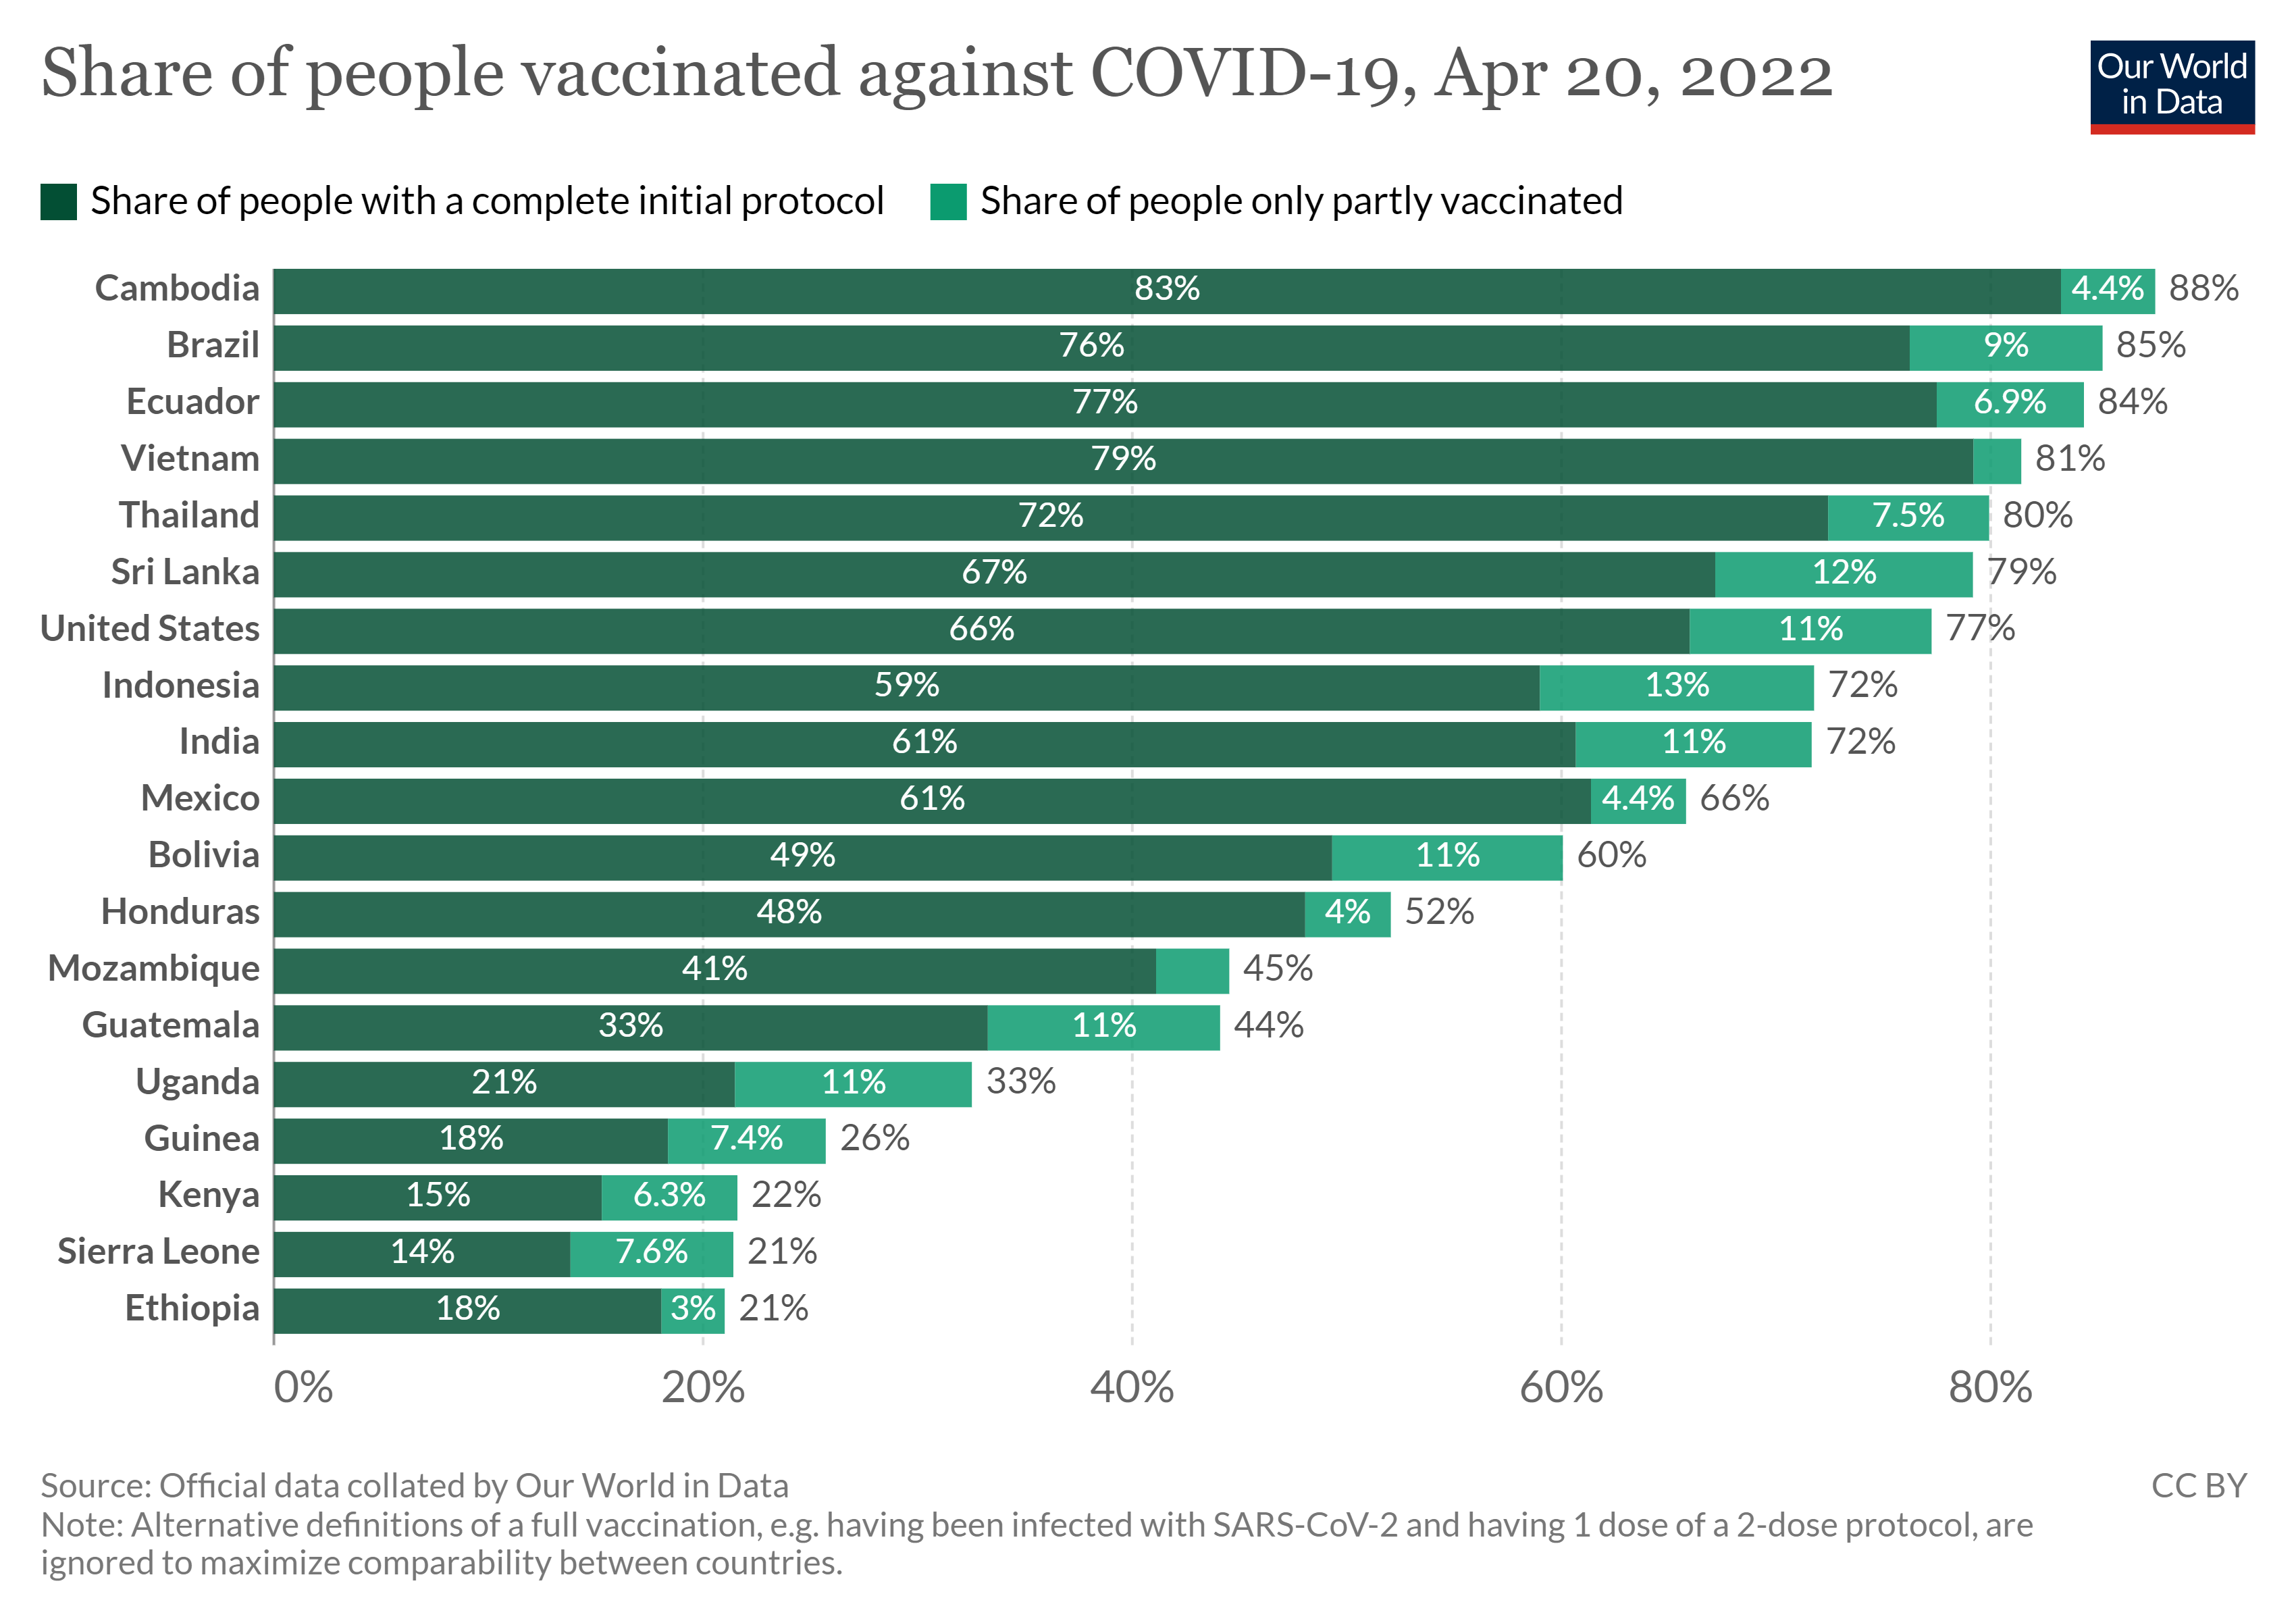 COVID-19 vaccine doses administered per 100 people